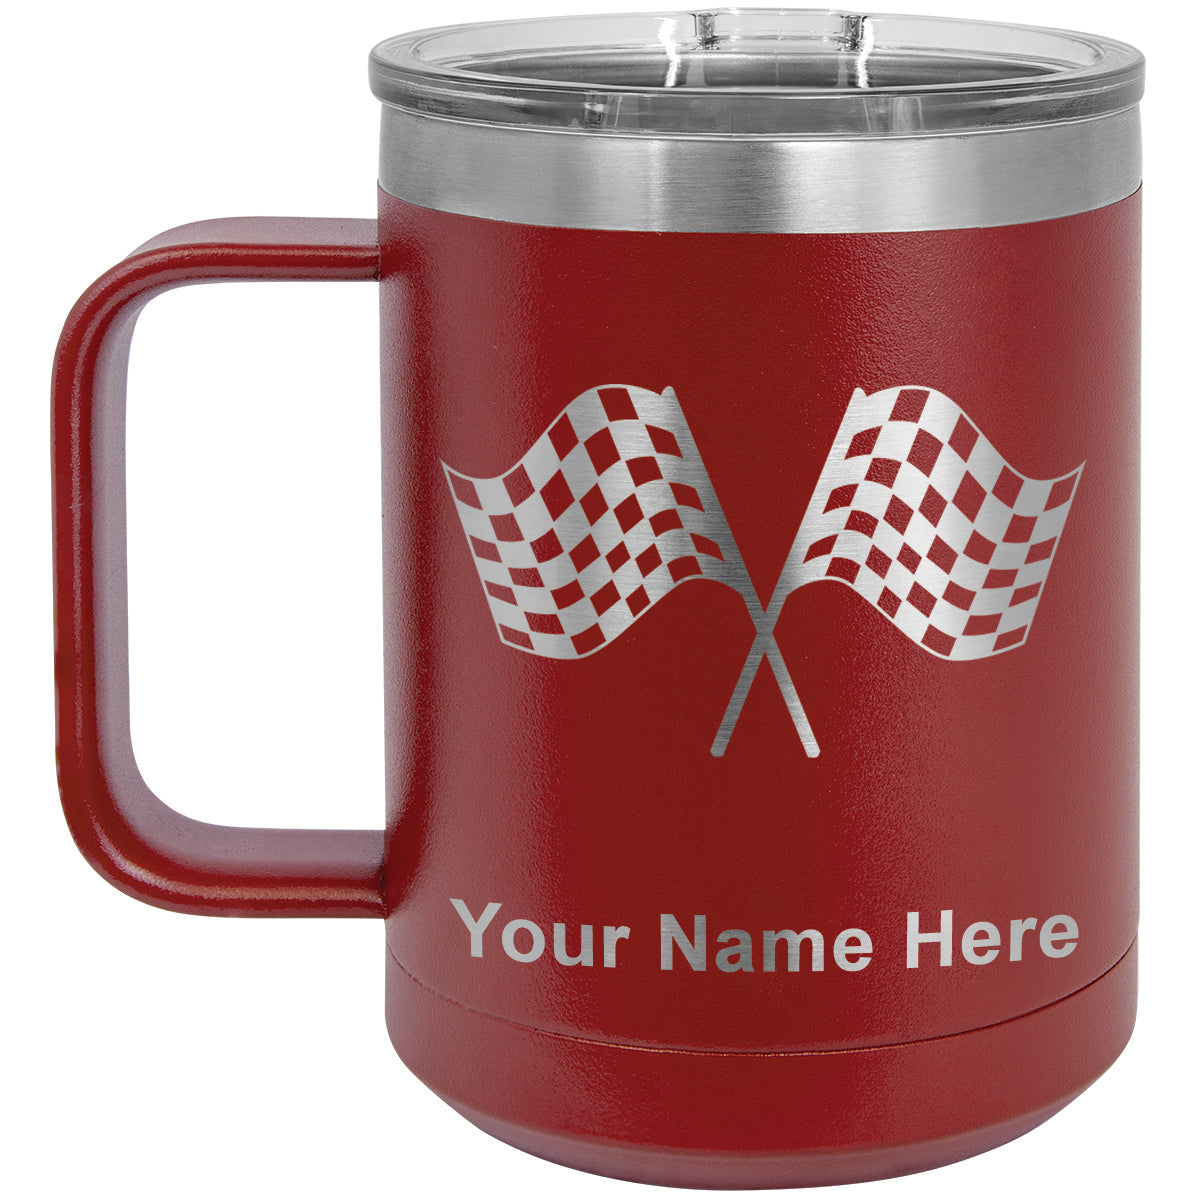 15oz Vacuum Insulated Coffee Mug, Racing Flags, Personalized Engraving Included